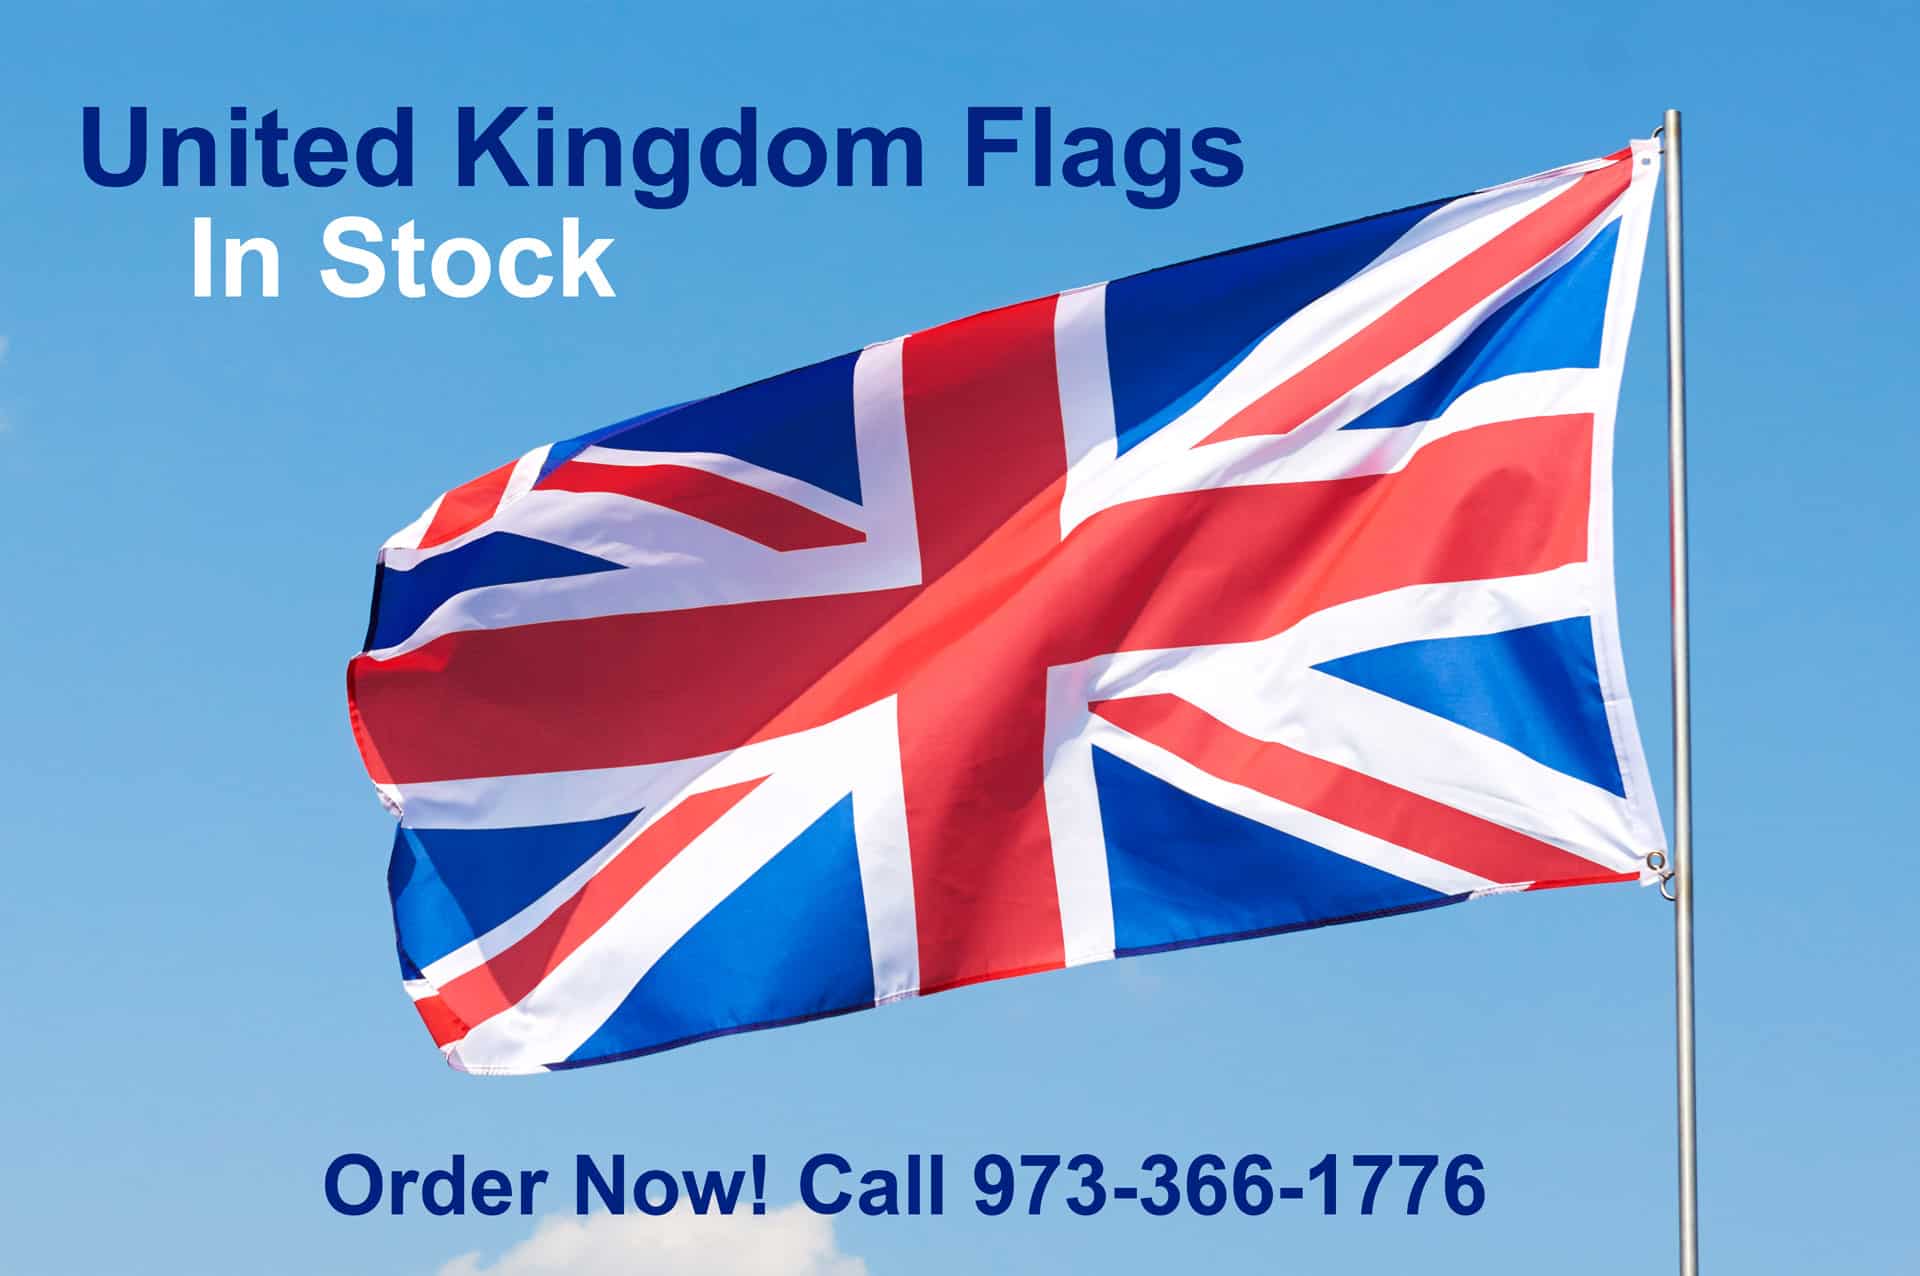 United Kingdom Flags for Sale – In Stock – Order Now! Call 973-366-1776